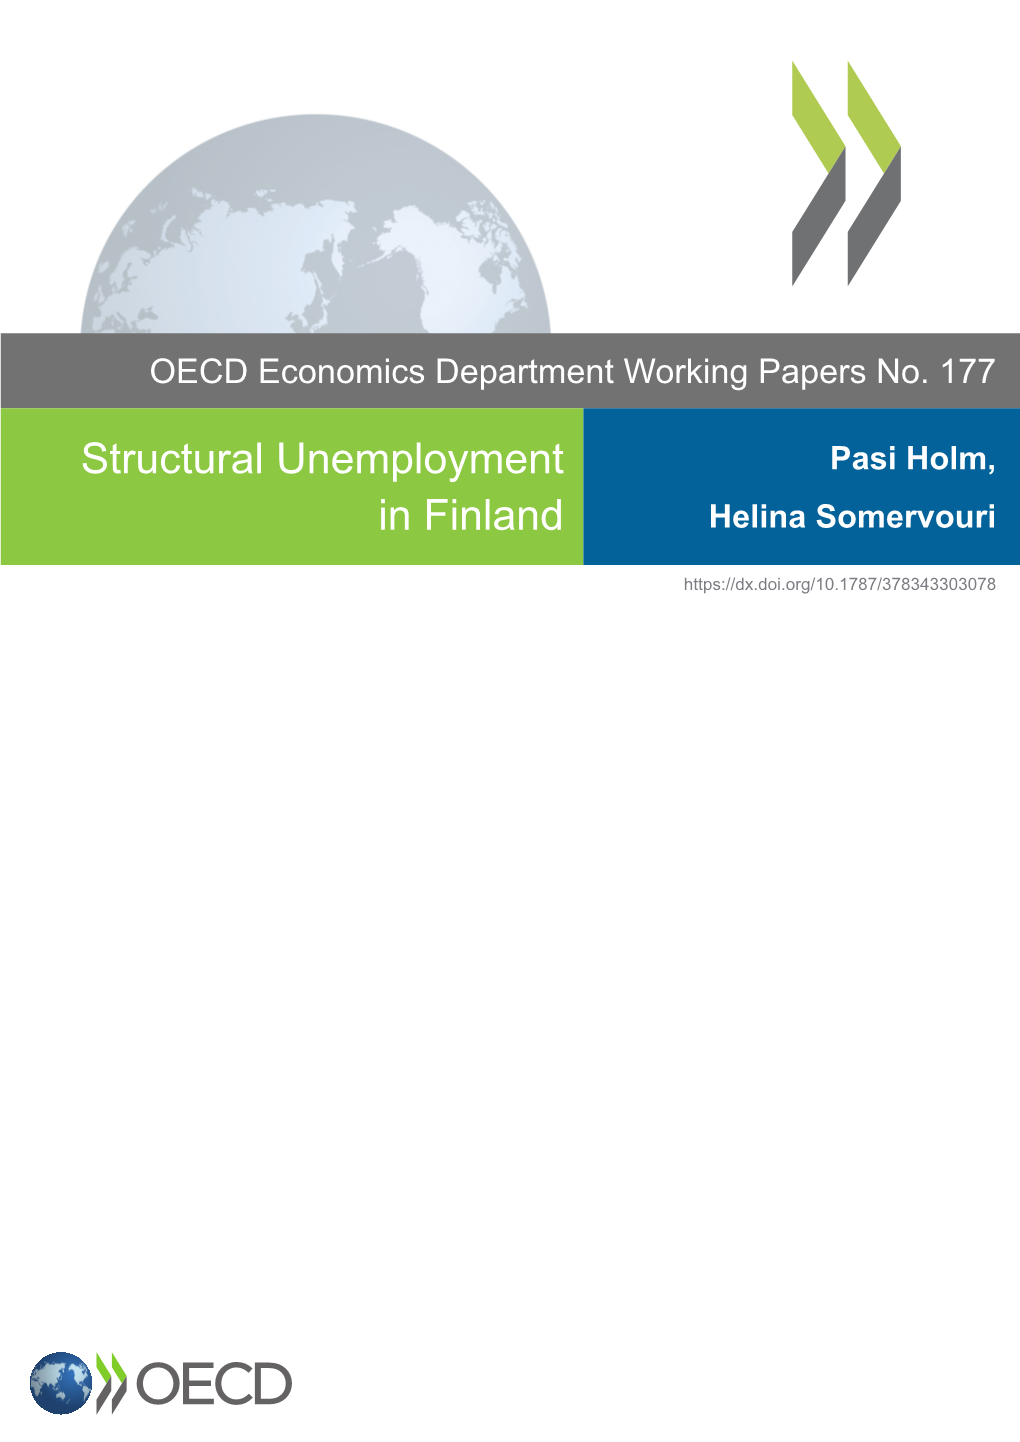 STRUCTURAL UNEMPLOYMENT in FINLAND by Pasi Holm and Helina Somervouri